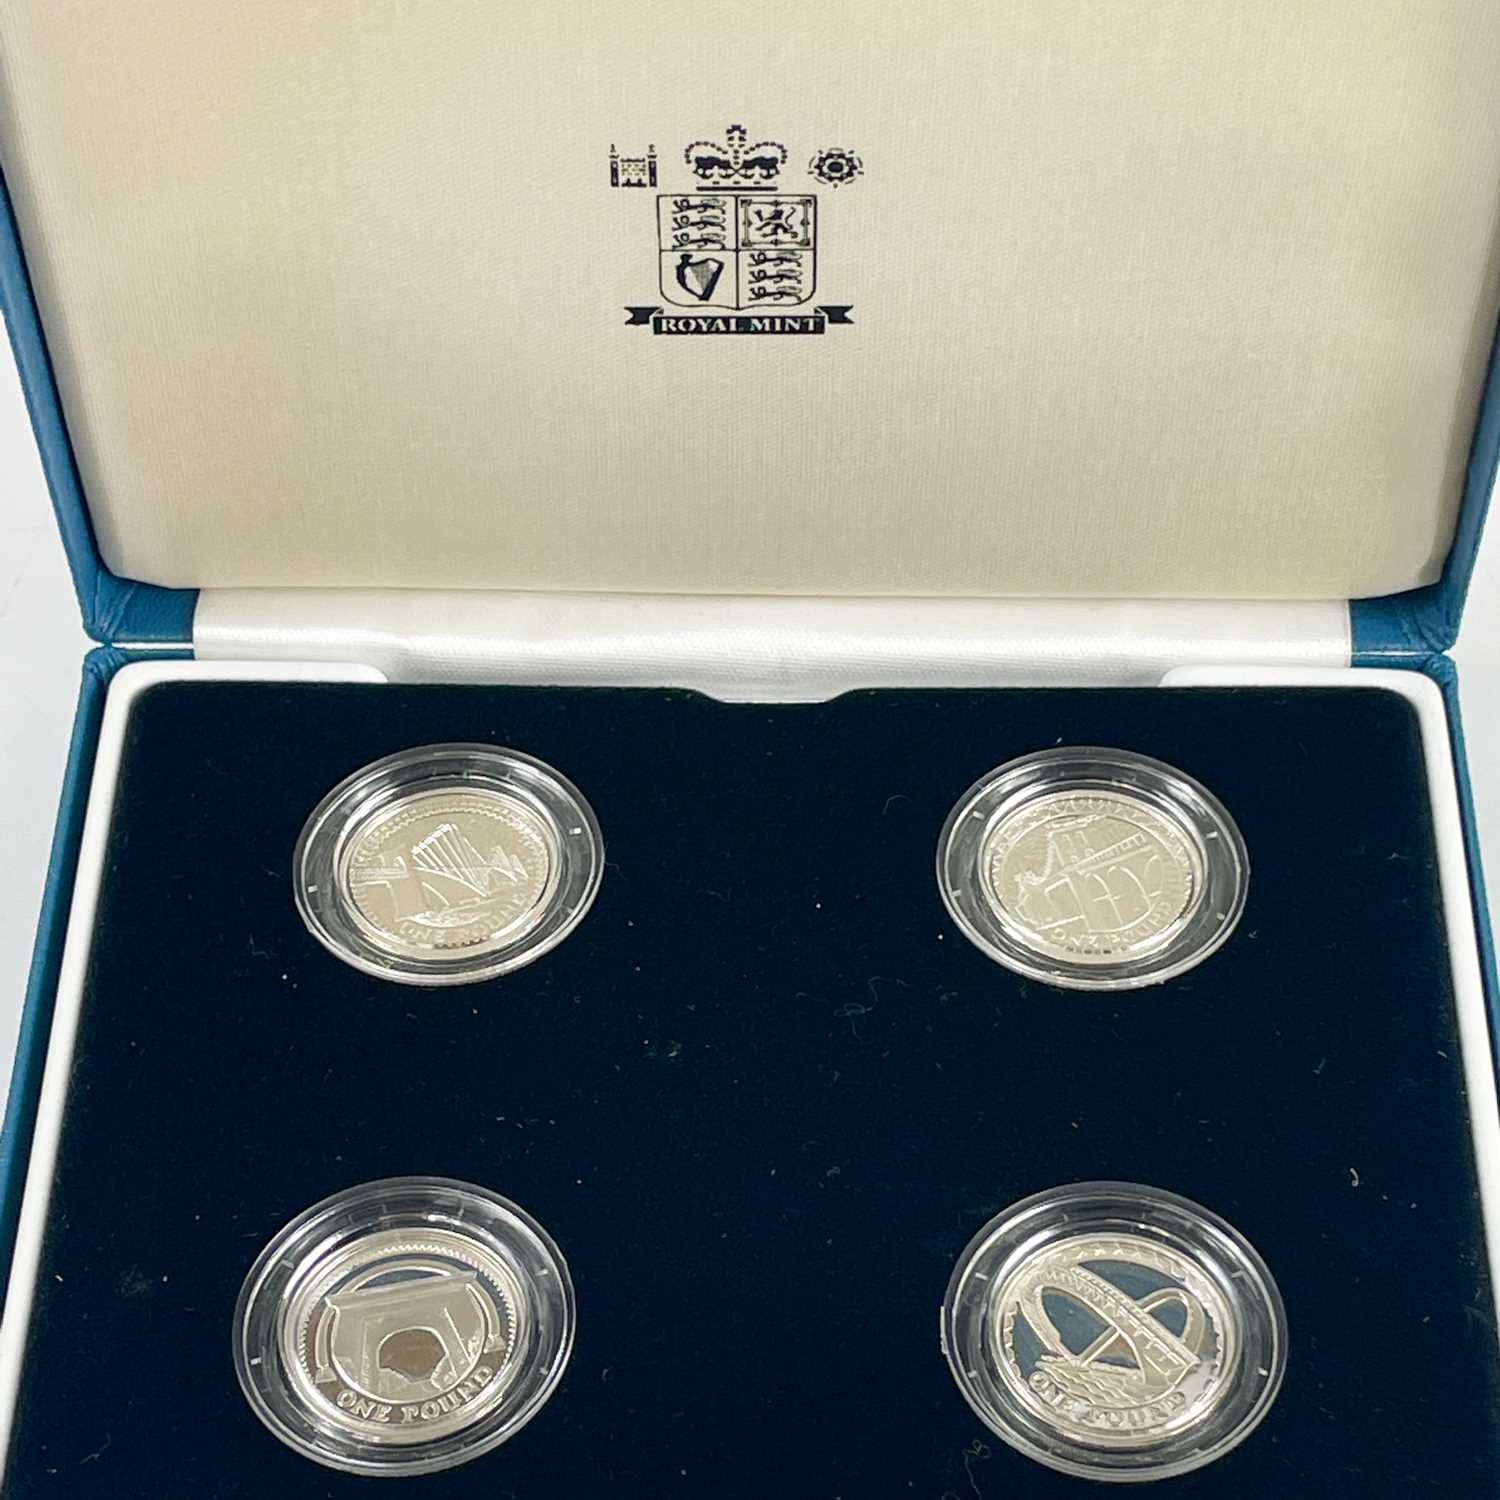 UK Silver Proof £1 Coins 2006 to 2009 (8 coins) in Royal Mint Coin Cases. - Image 8 of 8